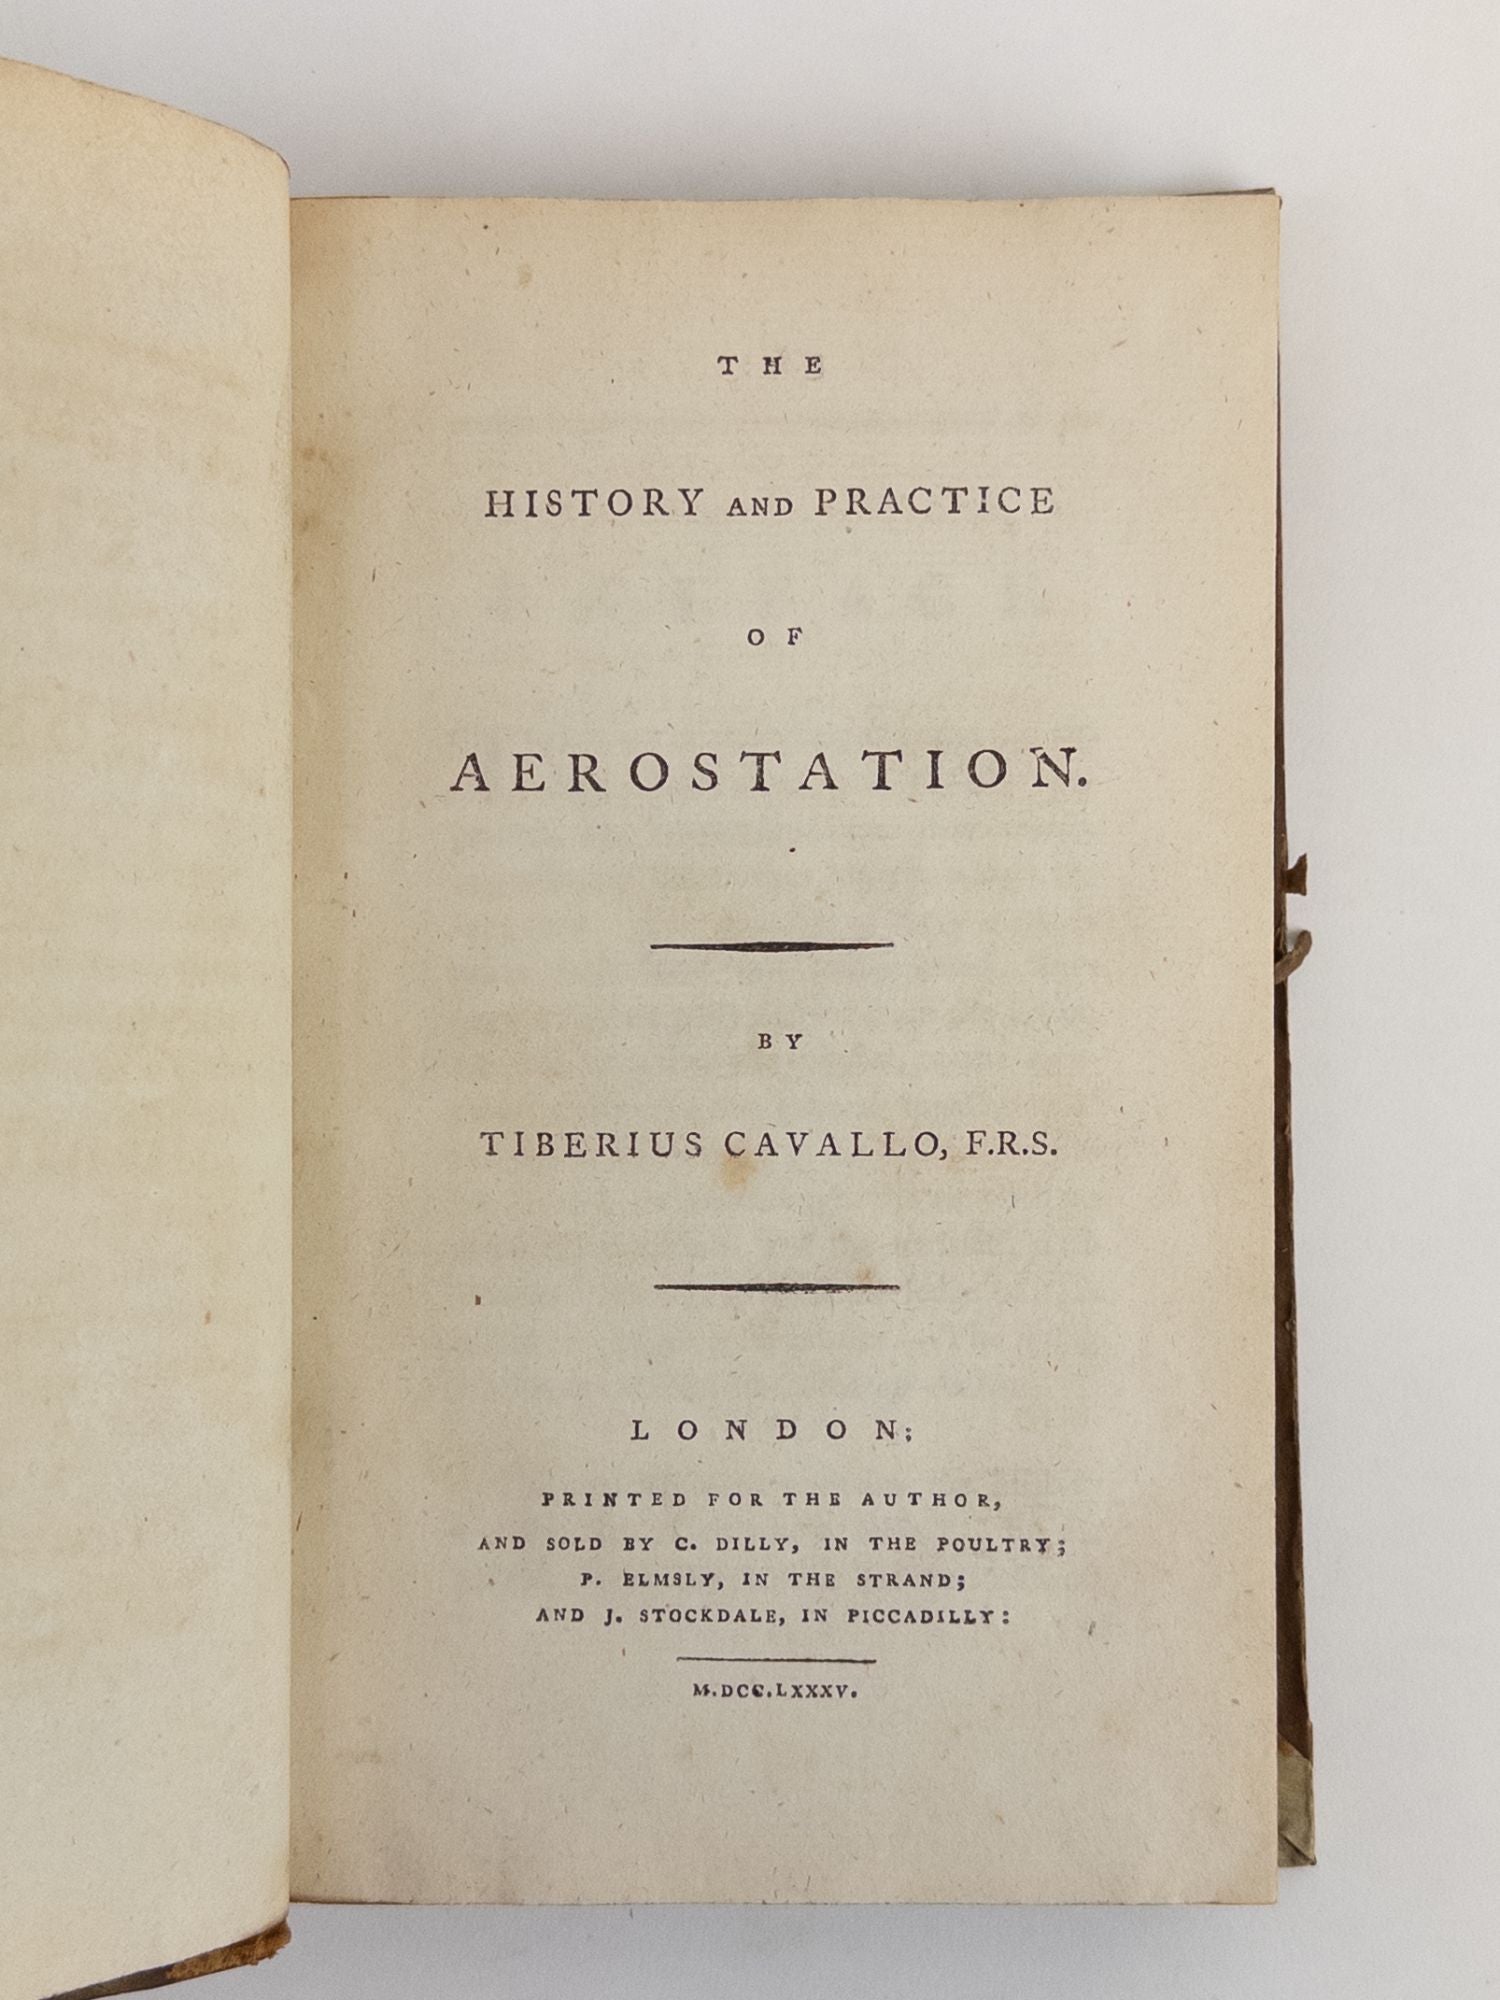 Product Image for THE HISTORY AND PRACTICE OF AEROSTATION